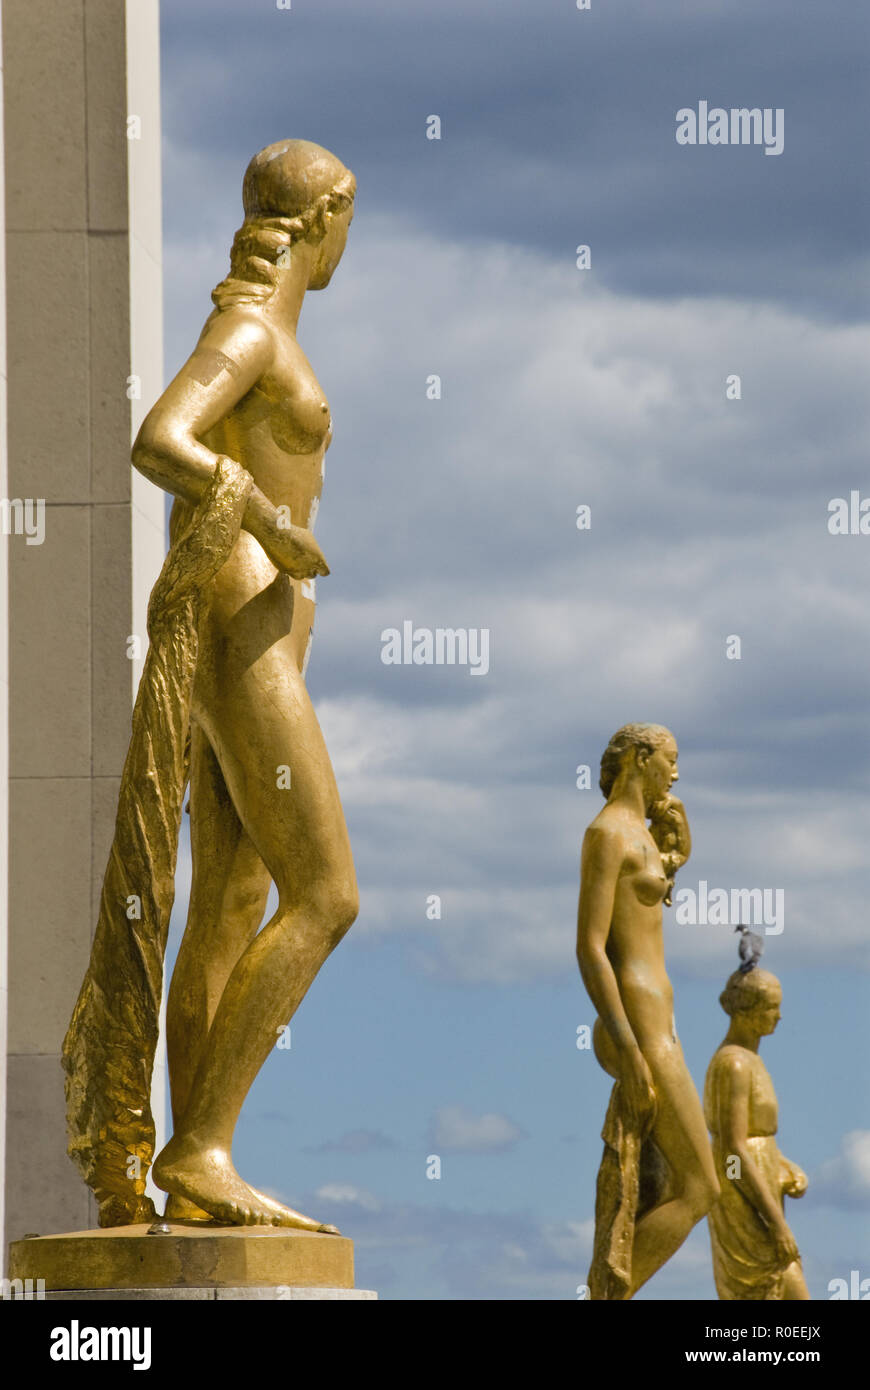 Eight gold figures representing the rights of man stand in the Place du Trocadero, outside the Palais de Chaillot, Paris, France. Stock Photo